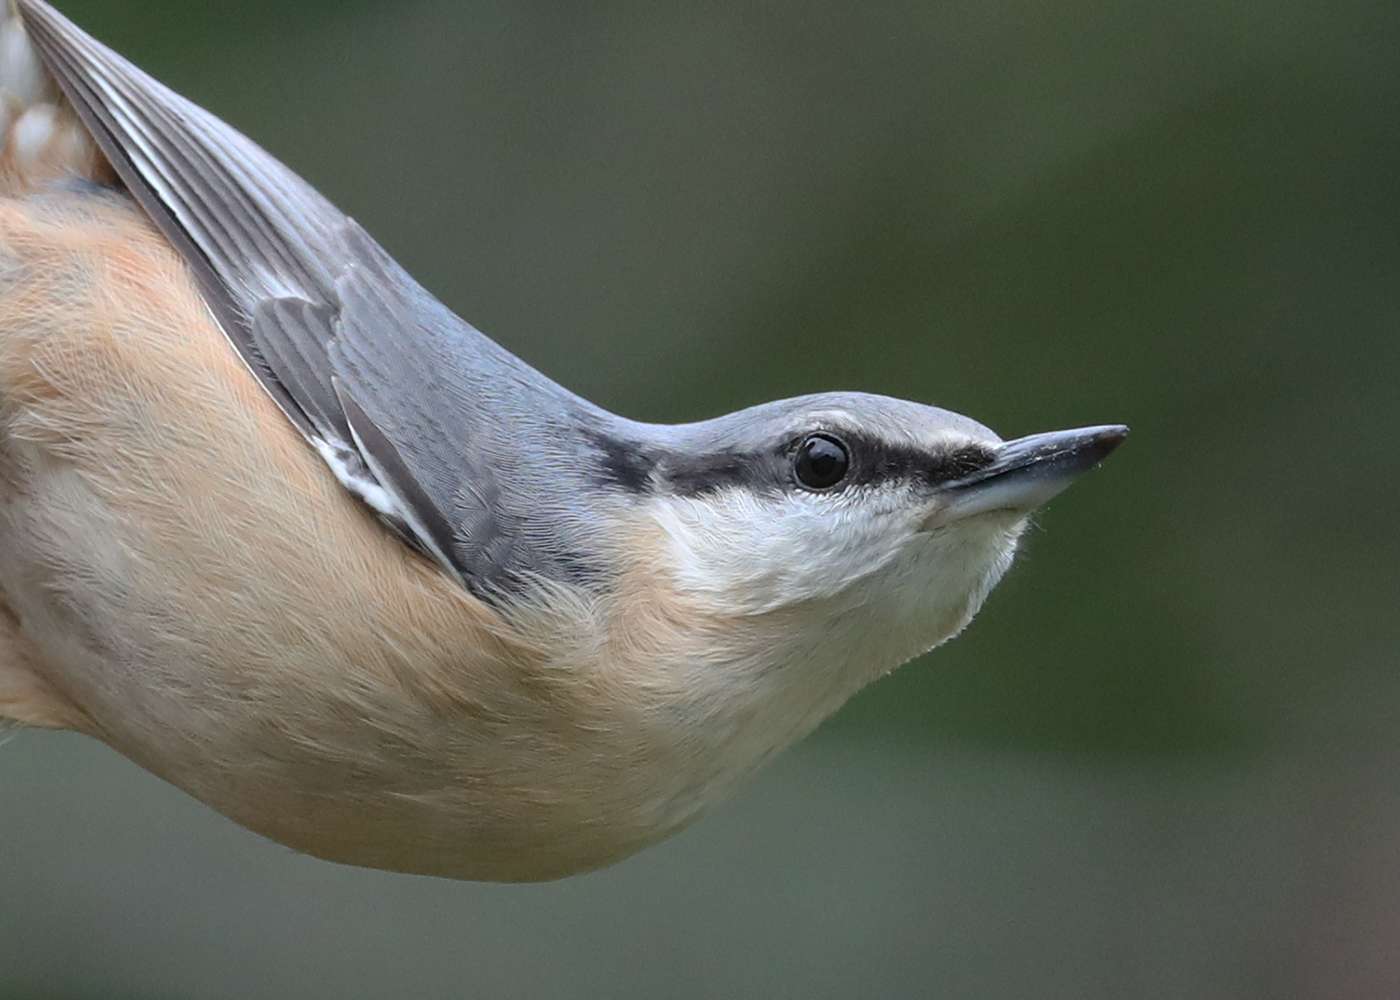 Nuthatch by Steve Hopper at South Brent